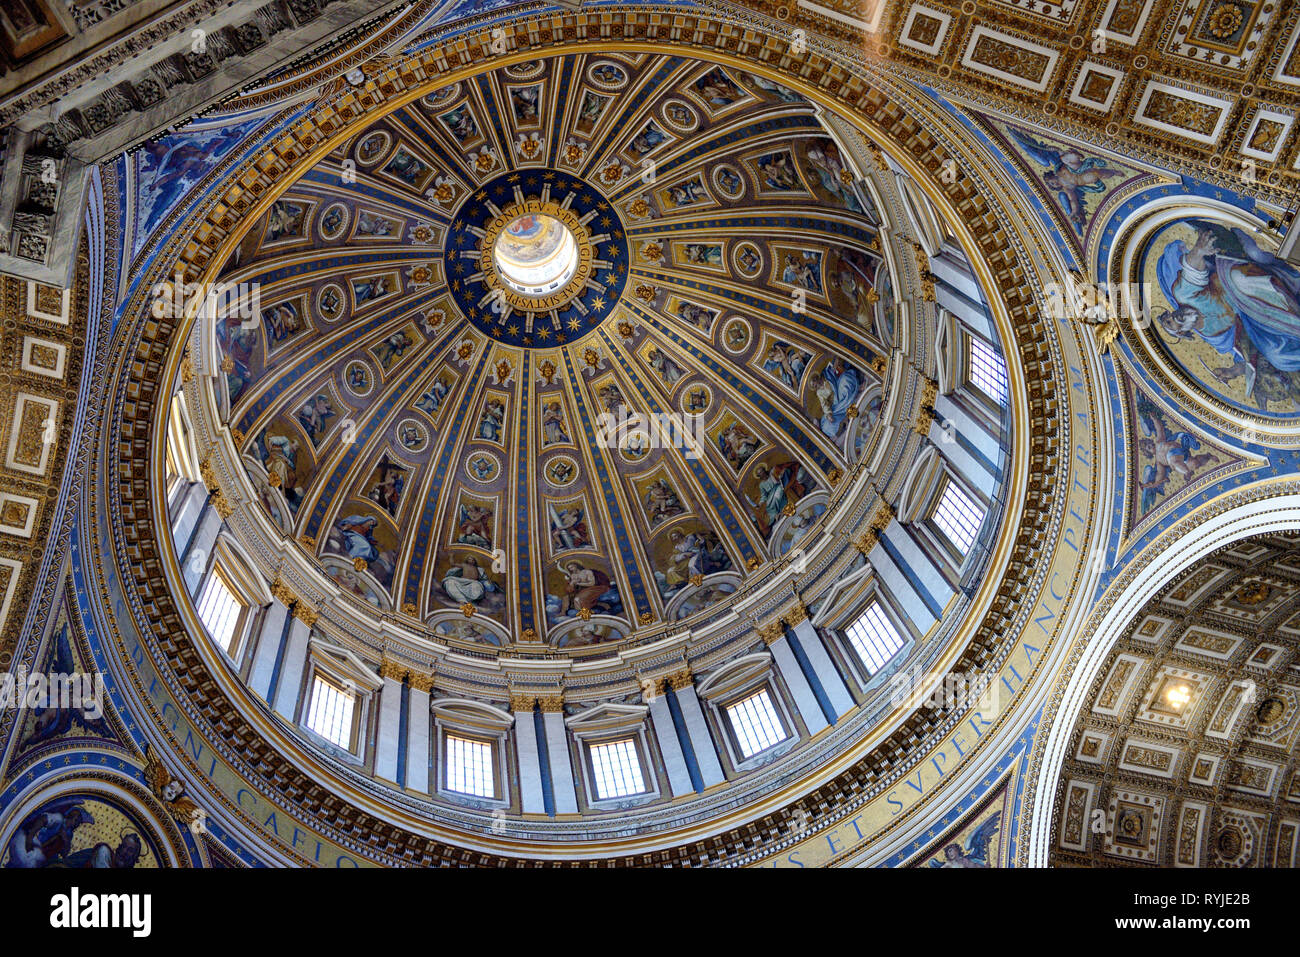 Interior Dome of Saint Peter's Basilica, Church or Cathedral Vatican, Rome, Italy Stock Photo